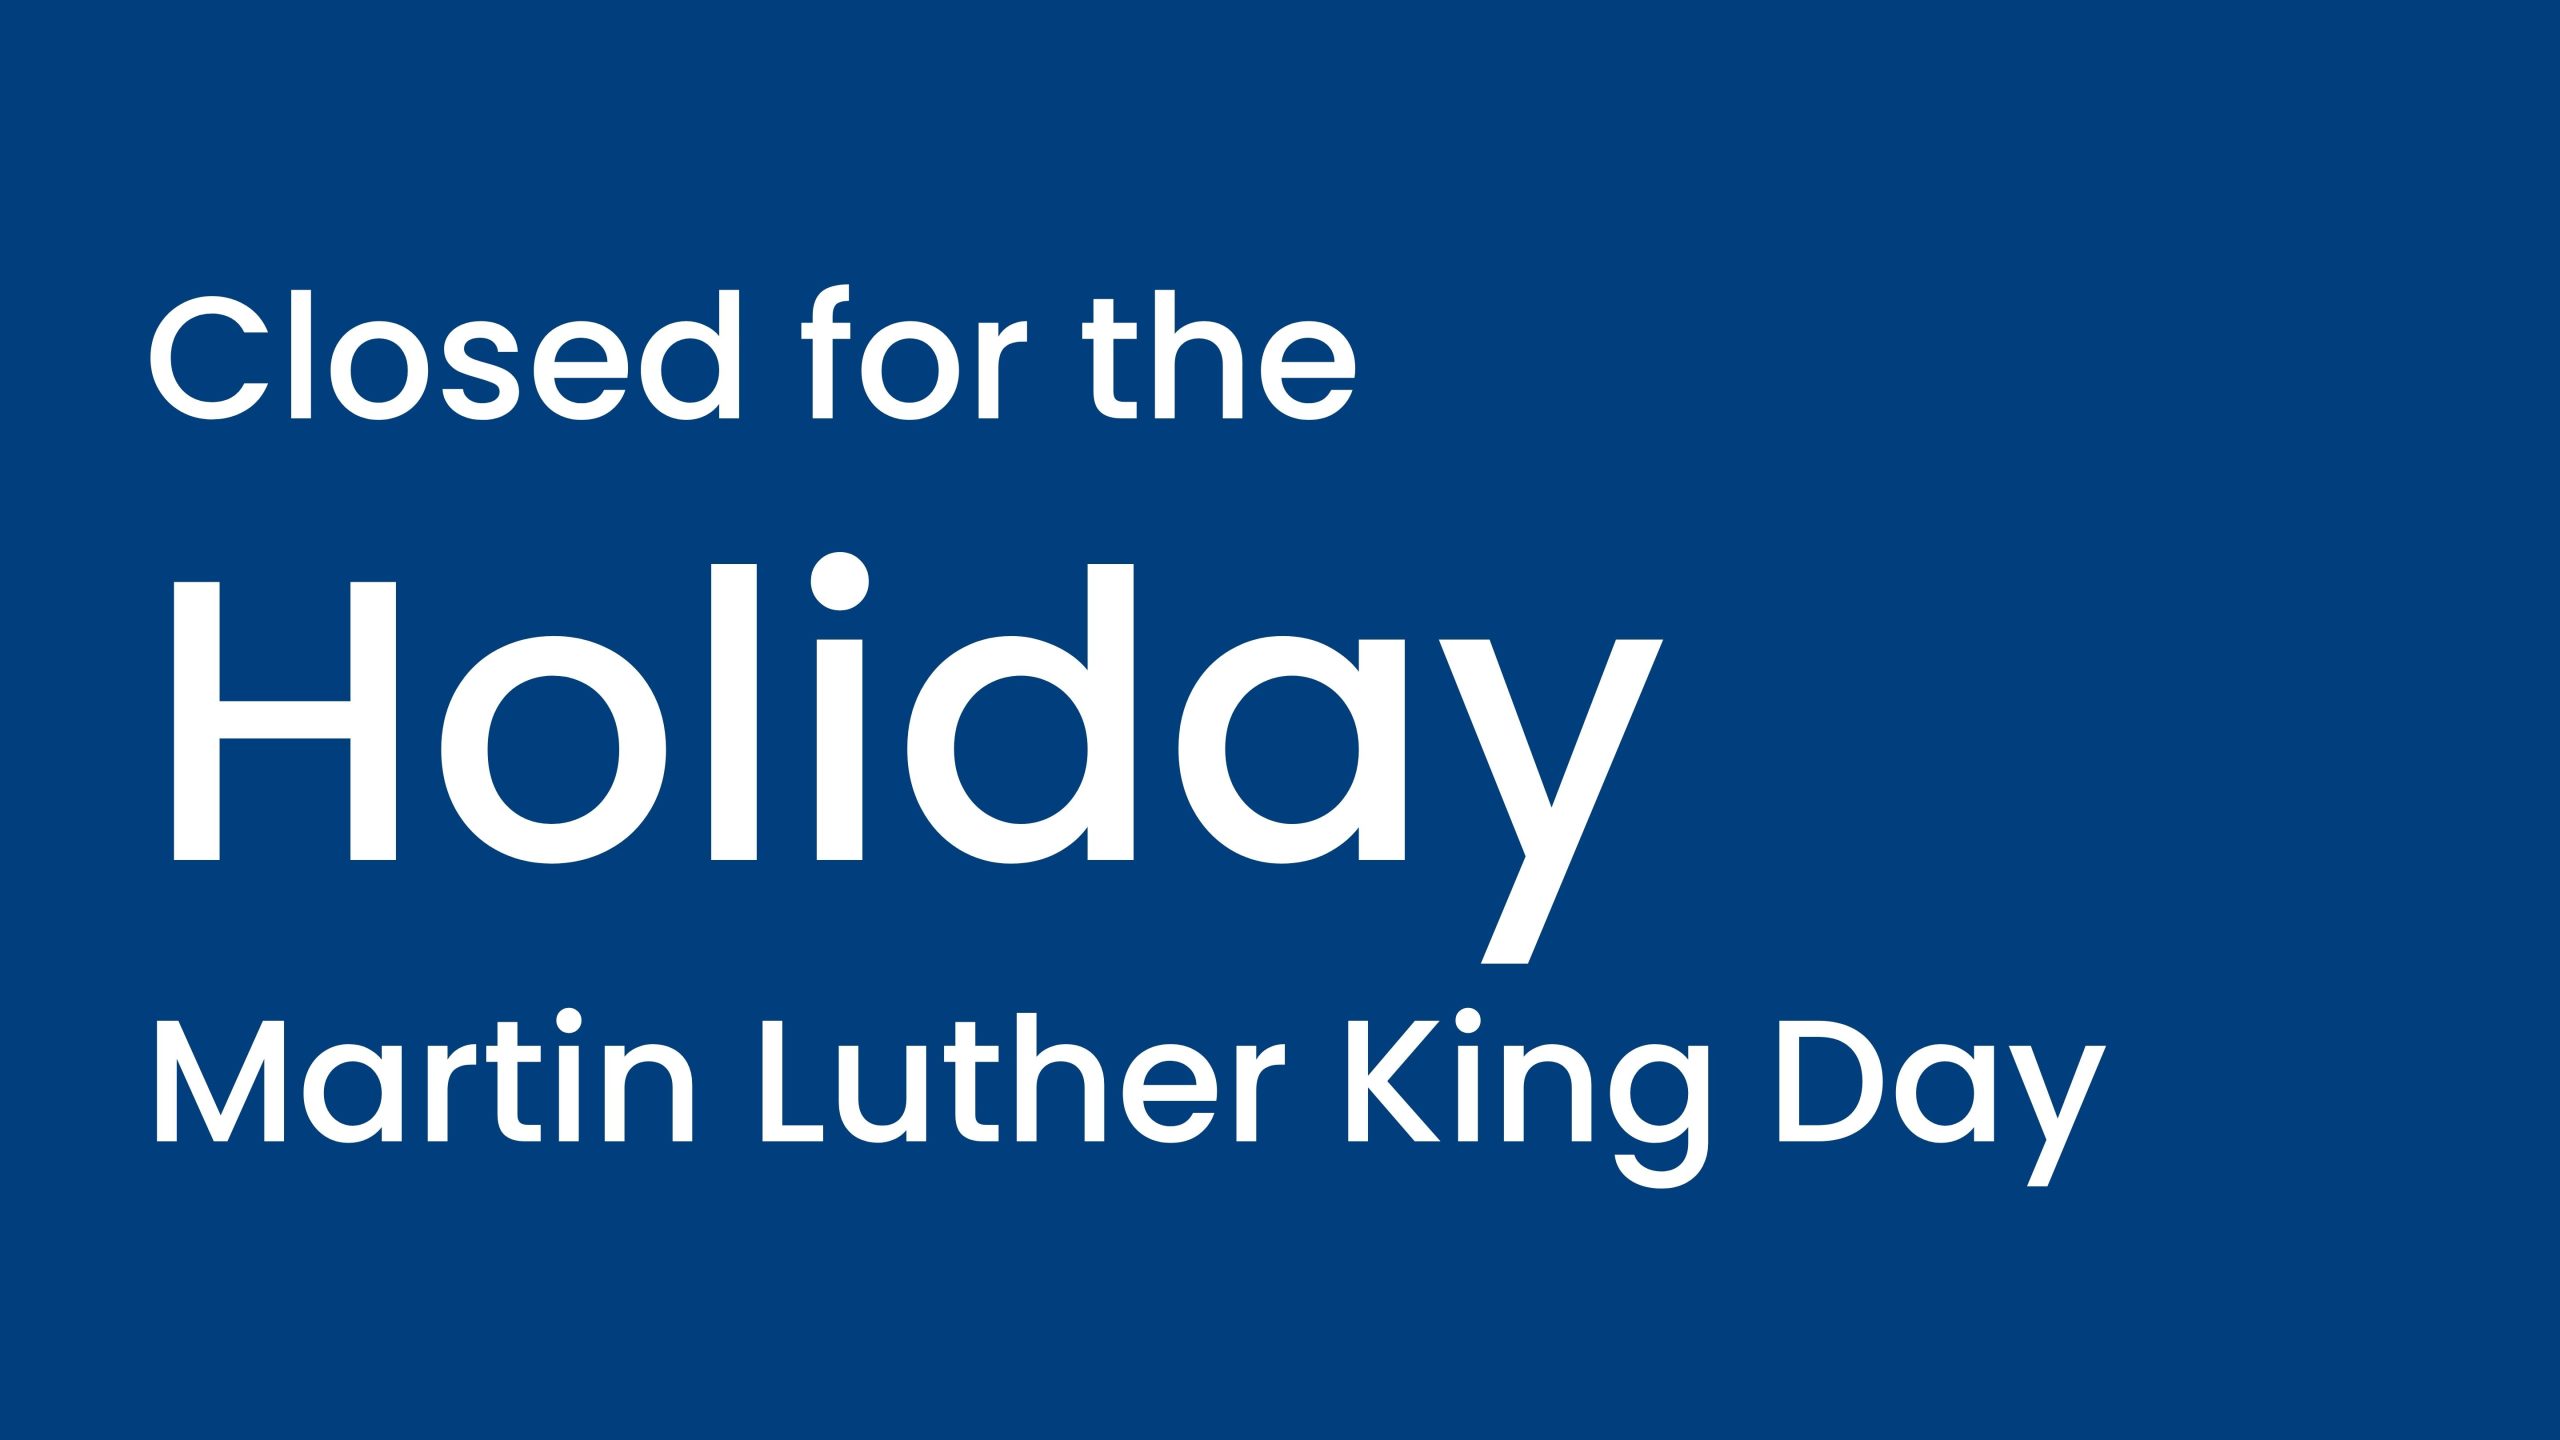 Closed for the Holiday: Martin Luther King Day